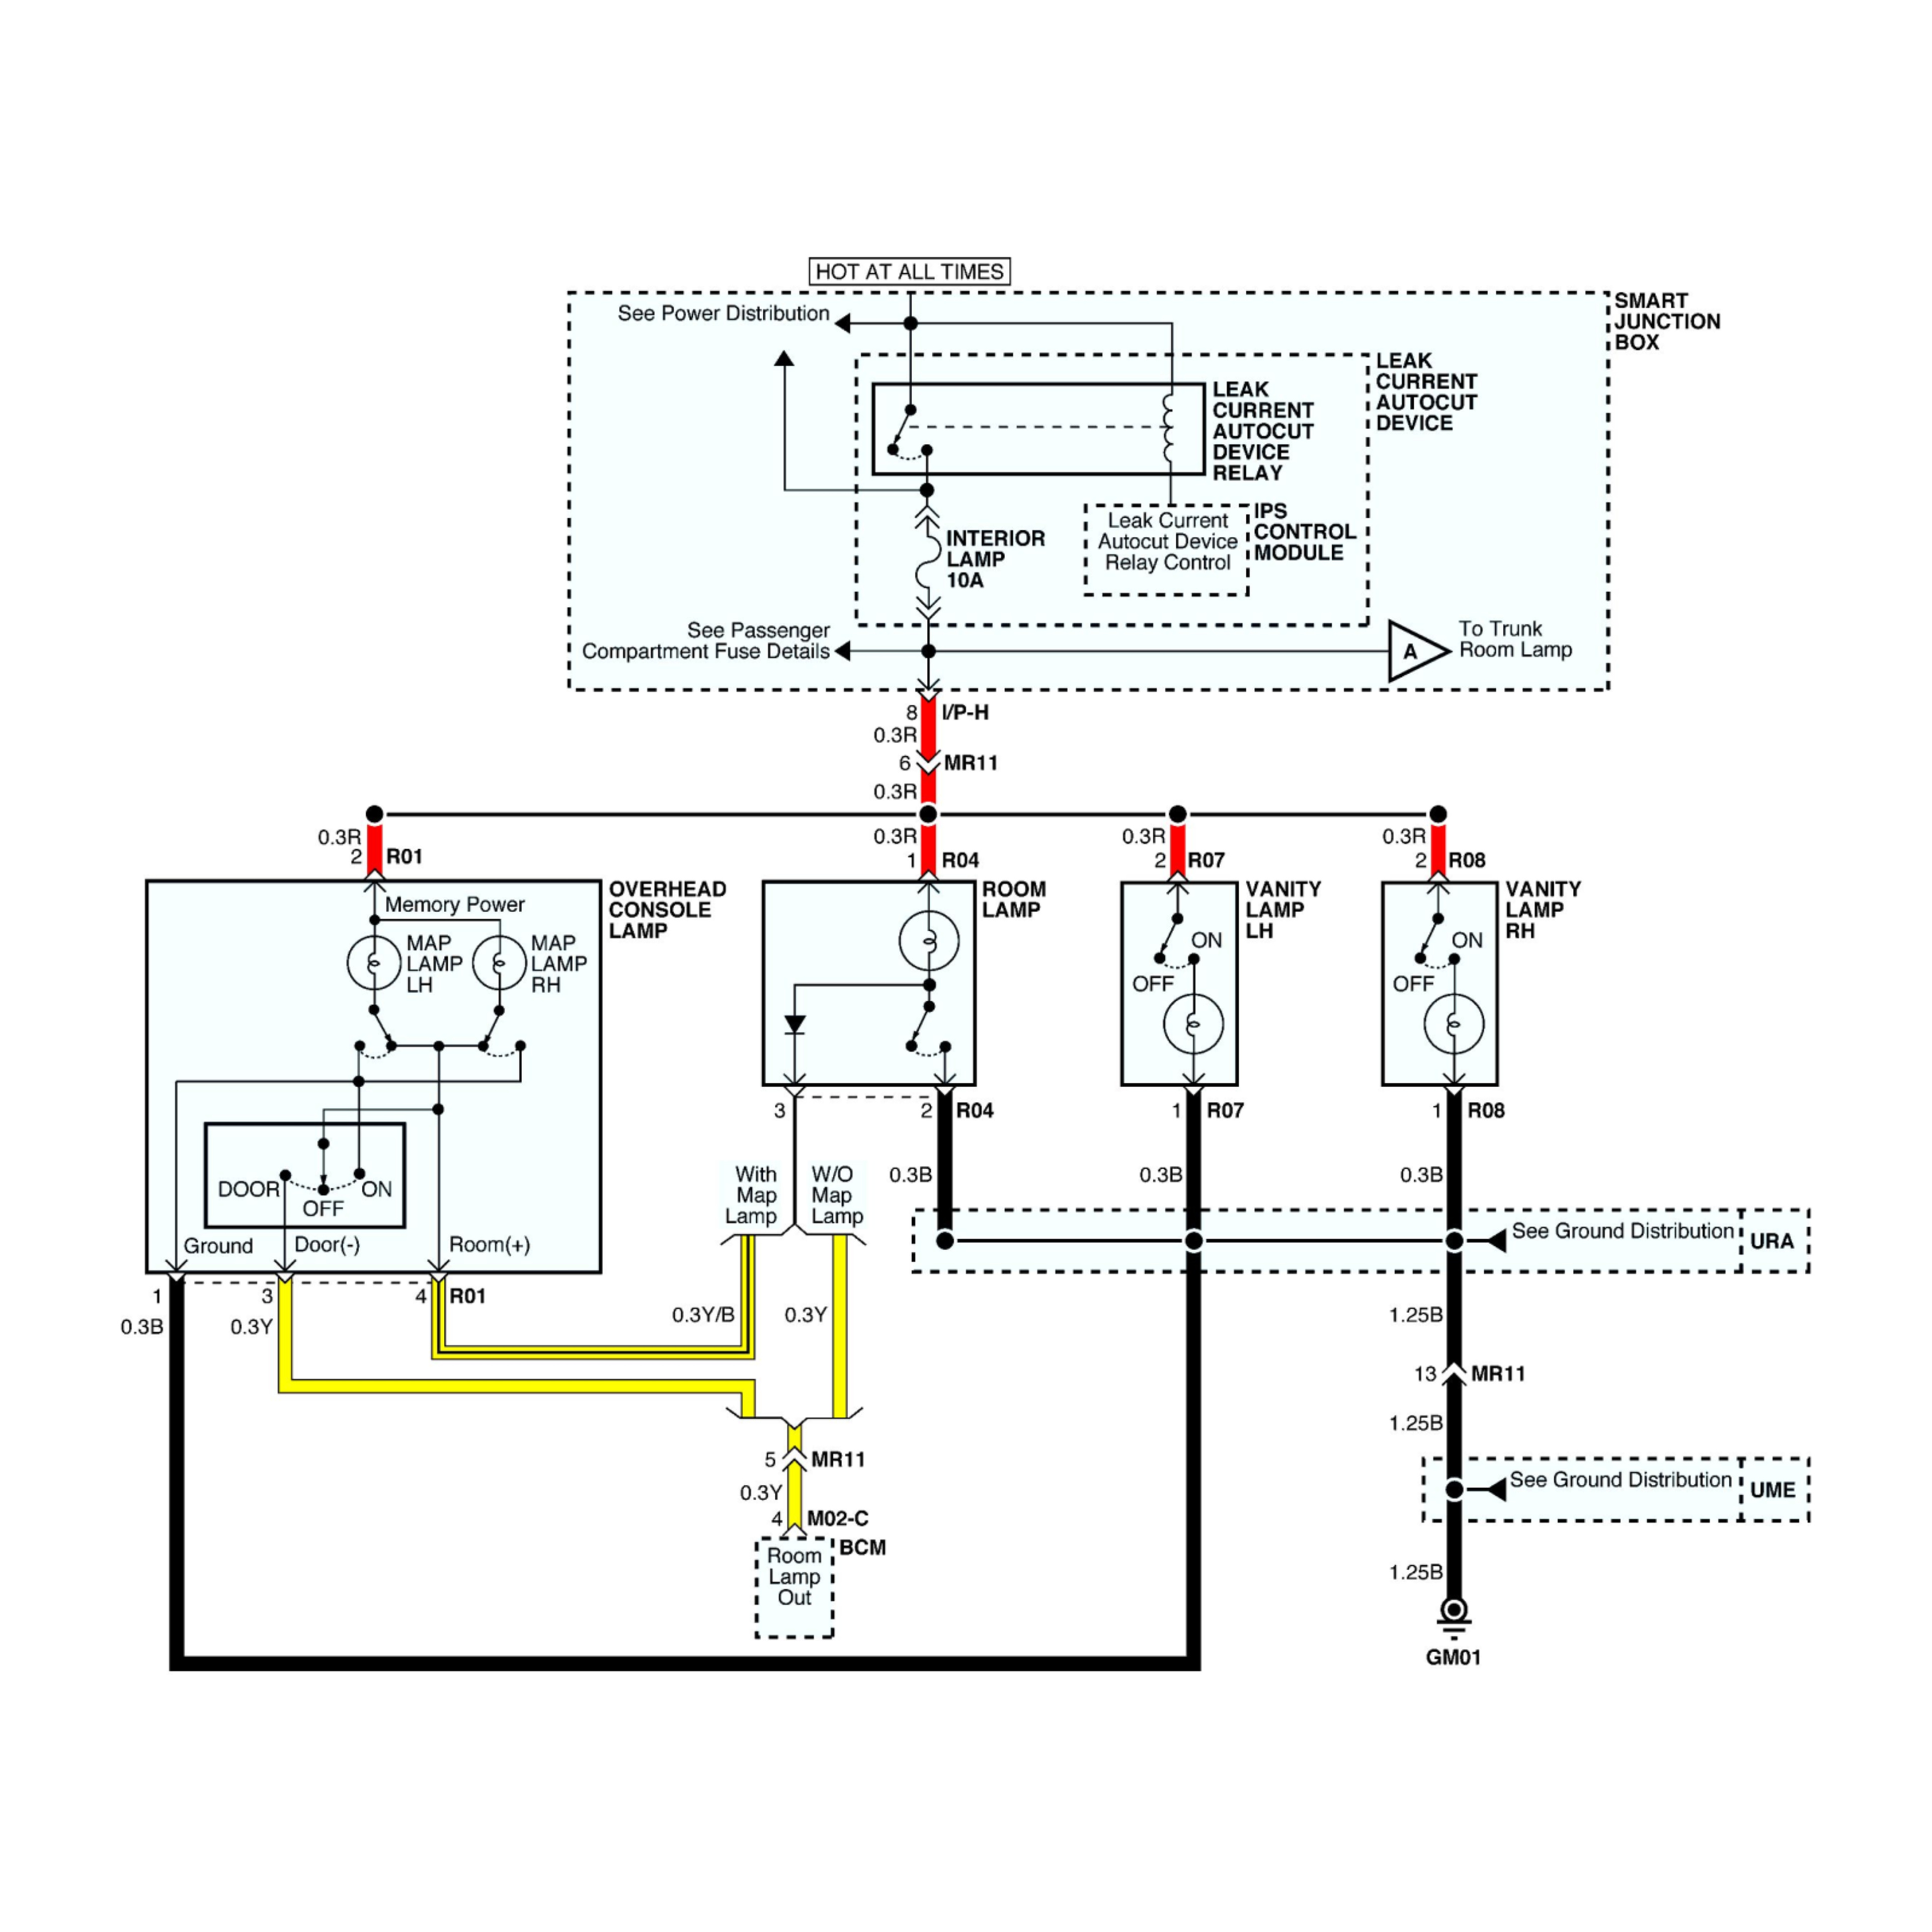 2003 Audi A6 wiring diagrams example